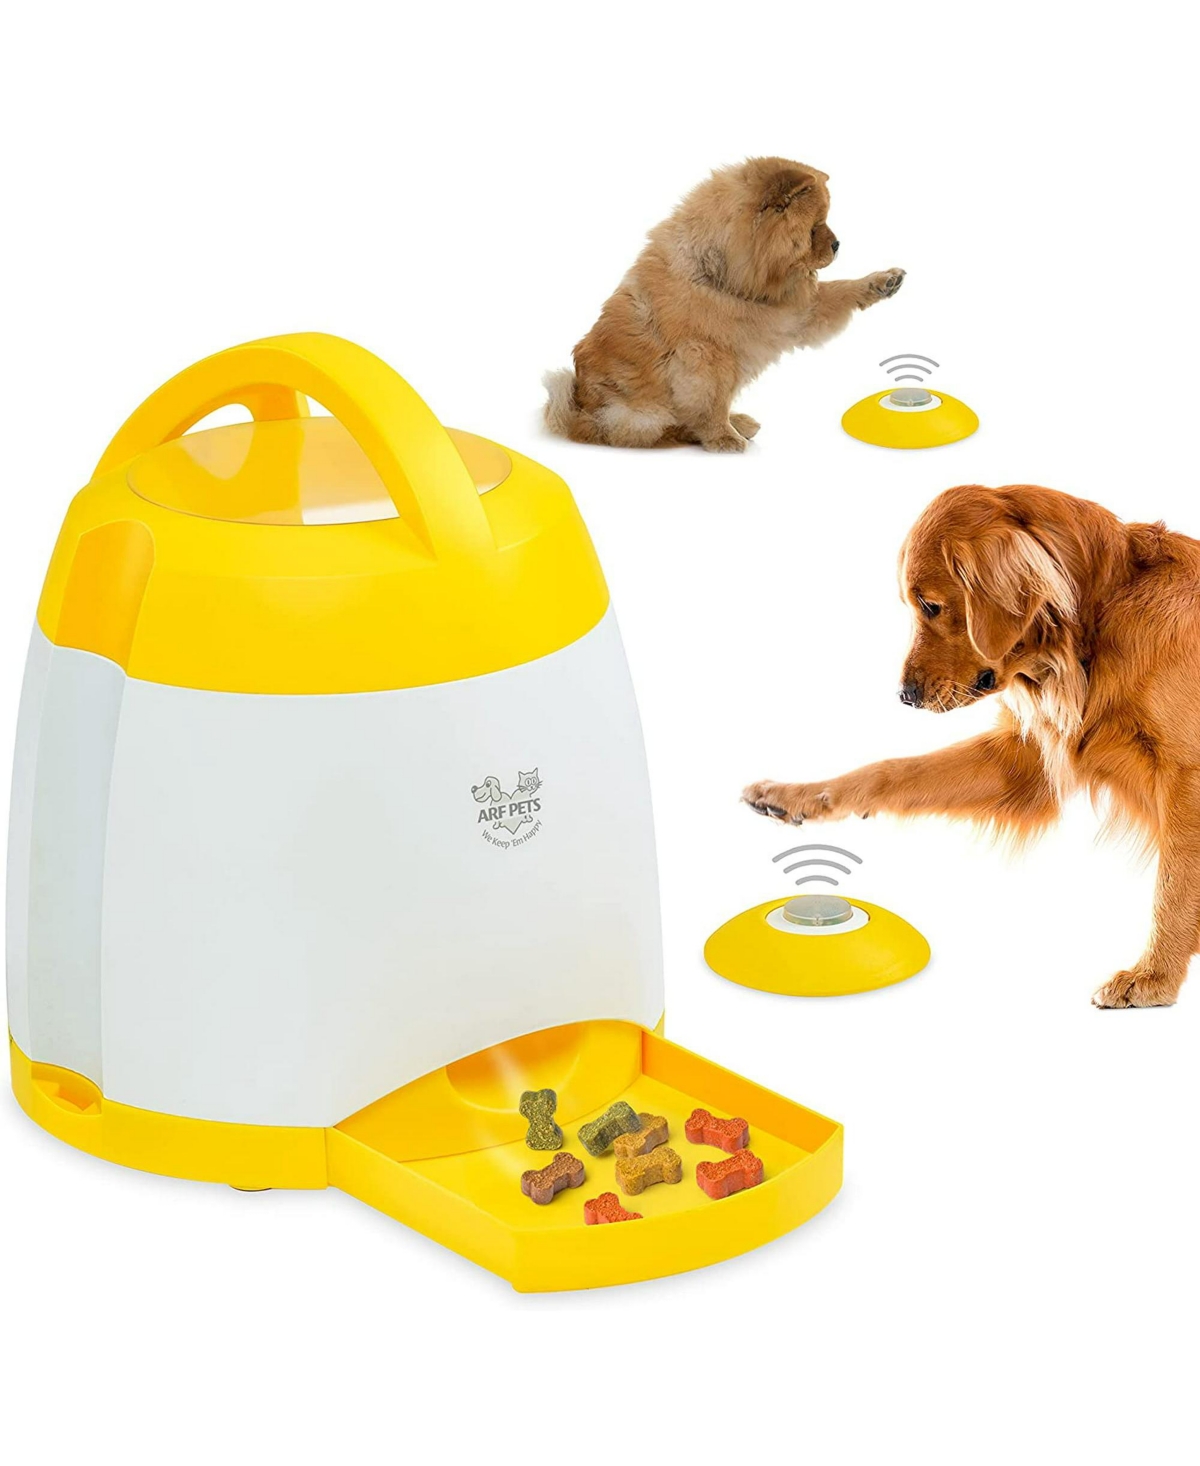 Dog Treat Dispenser with Button - Dog Memory Training Toy - 2 Buttons - White